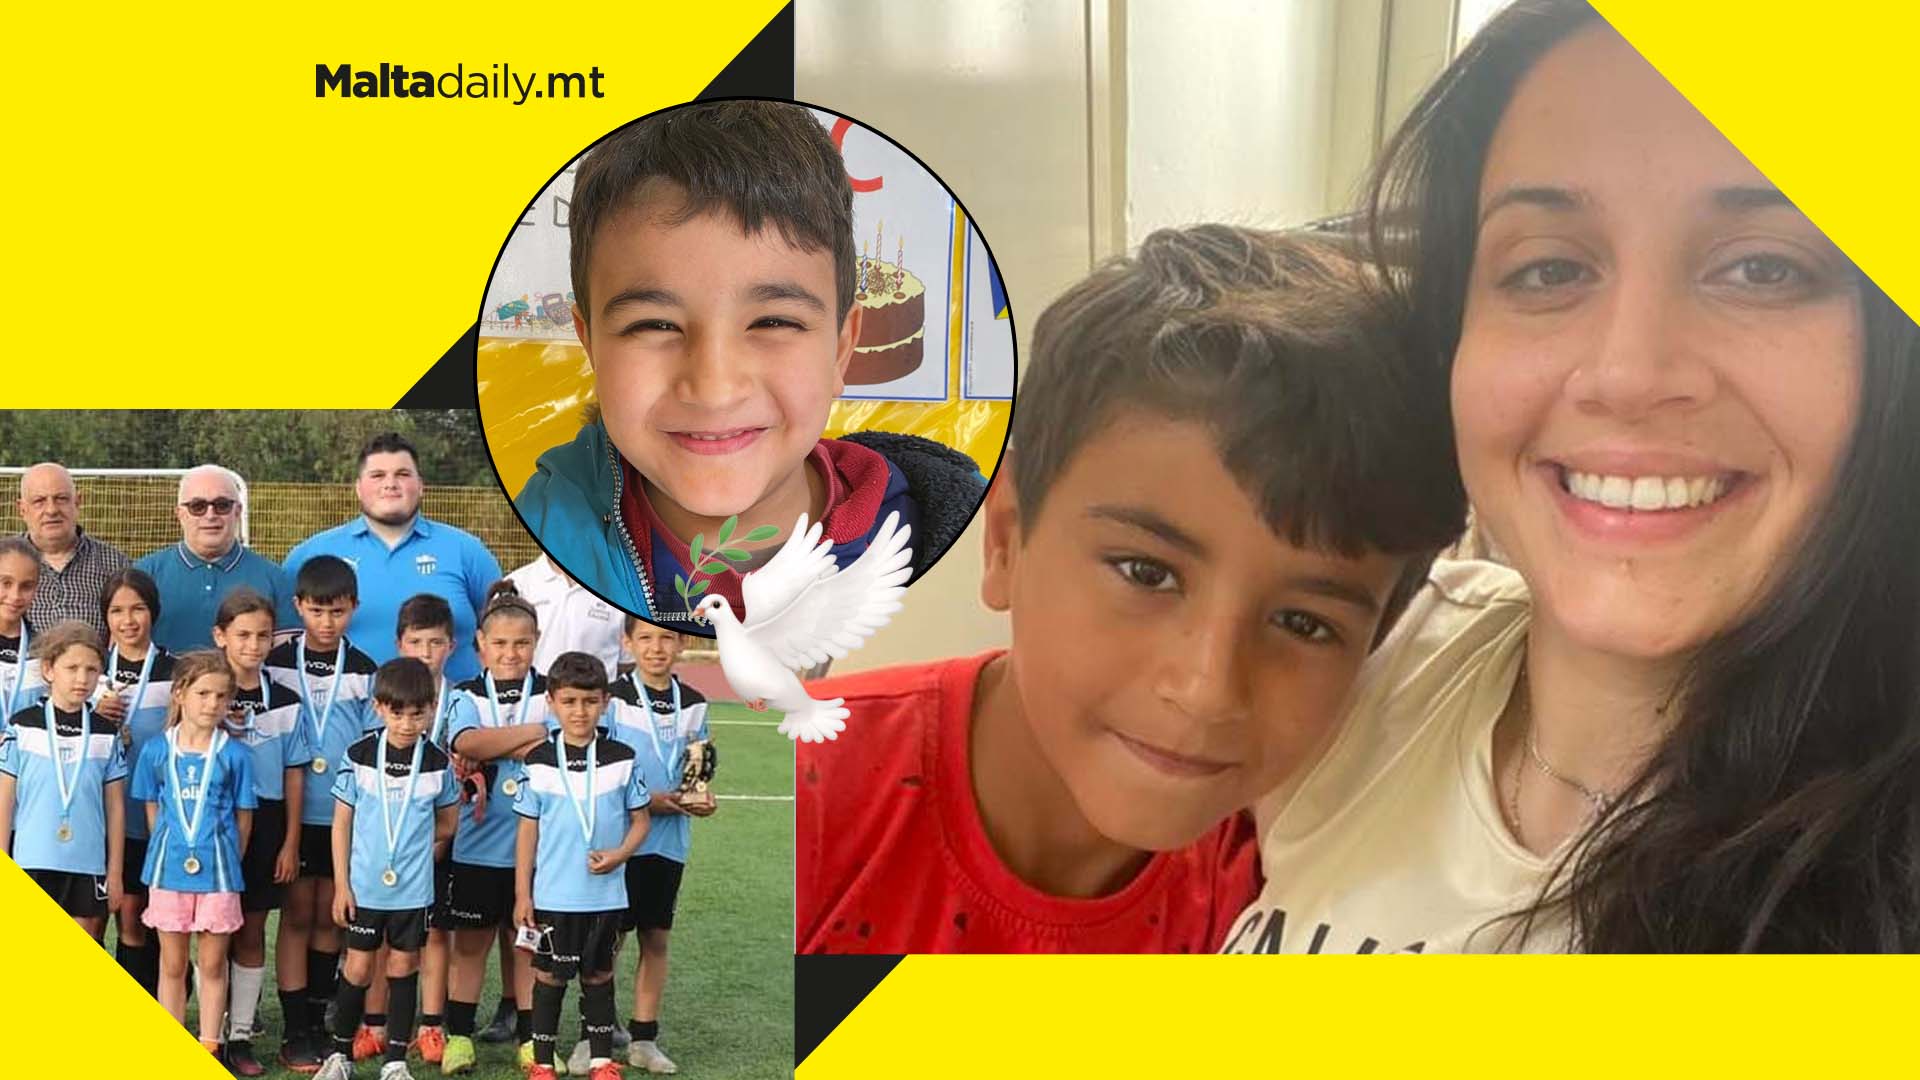 Many in mourning following the loss of little footballer Ilyas